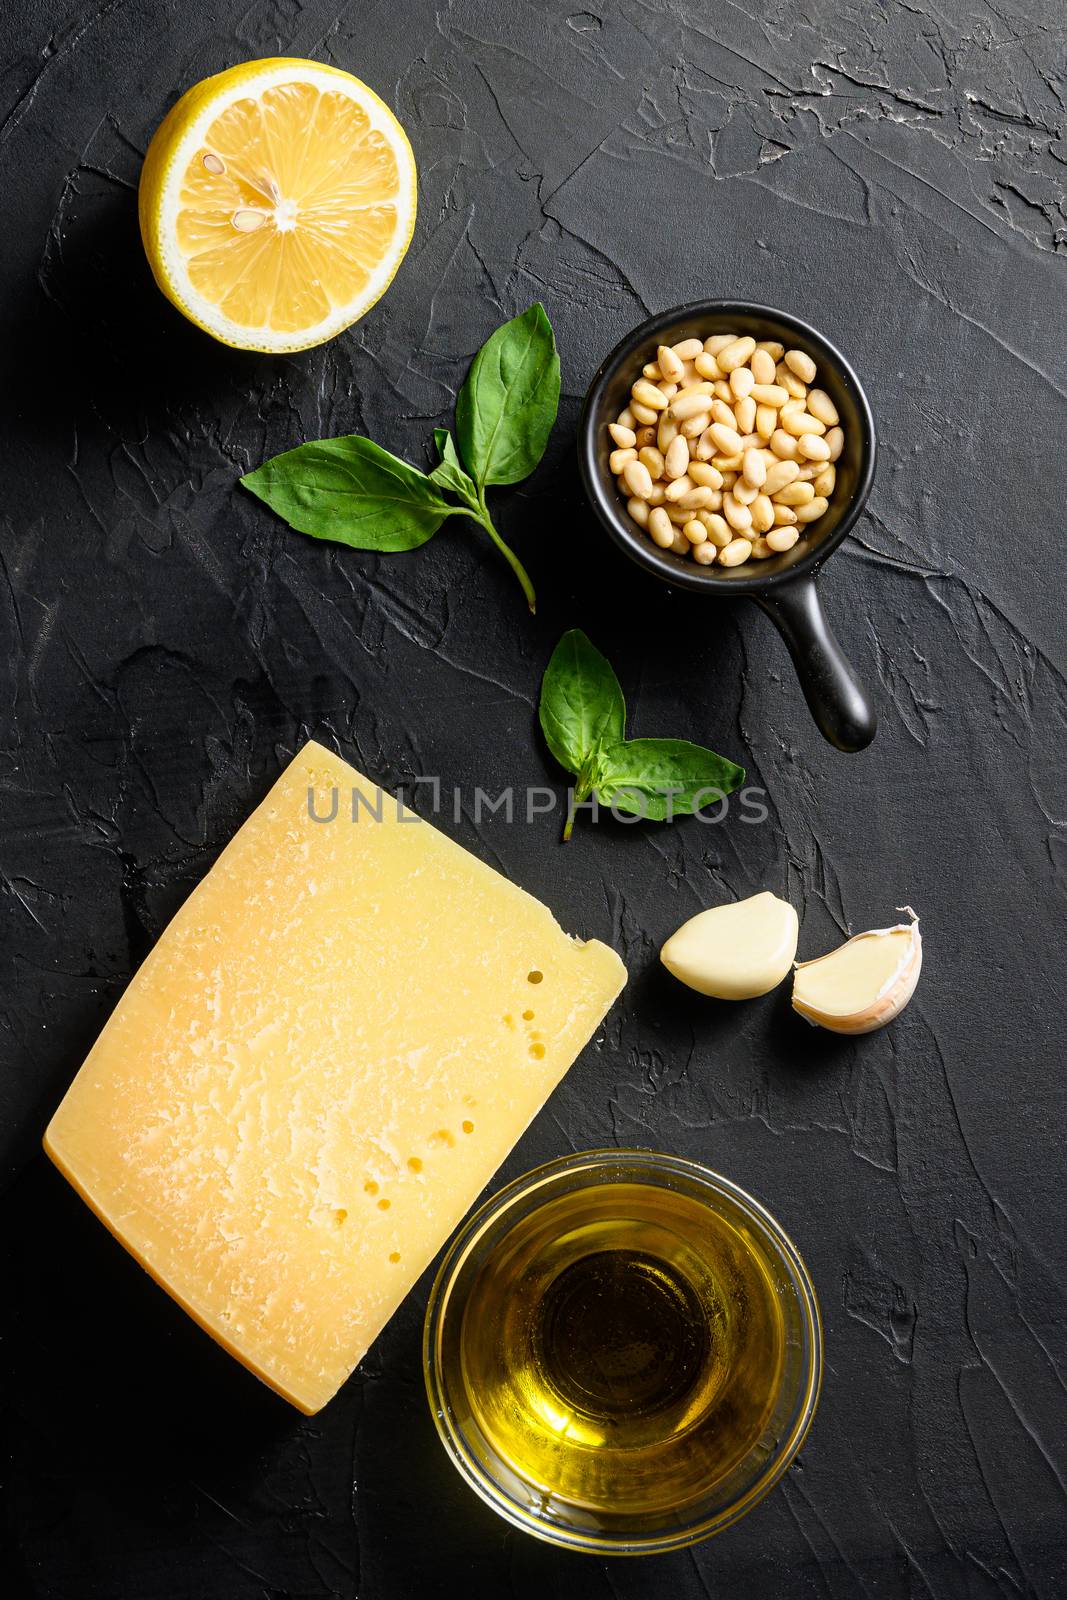 Pesto alla Genovese , Fresh ingredients for pesto genovese sauce on black stone background from above parmesan cheese, basil leaves, pine nuts, olive oil, garlic and salt. Traditional Italian cuisine. Top view. by Ilianesolenyi